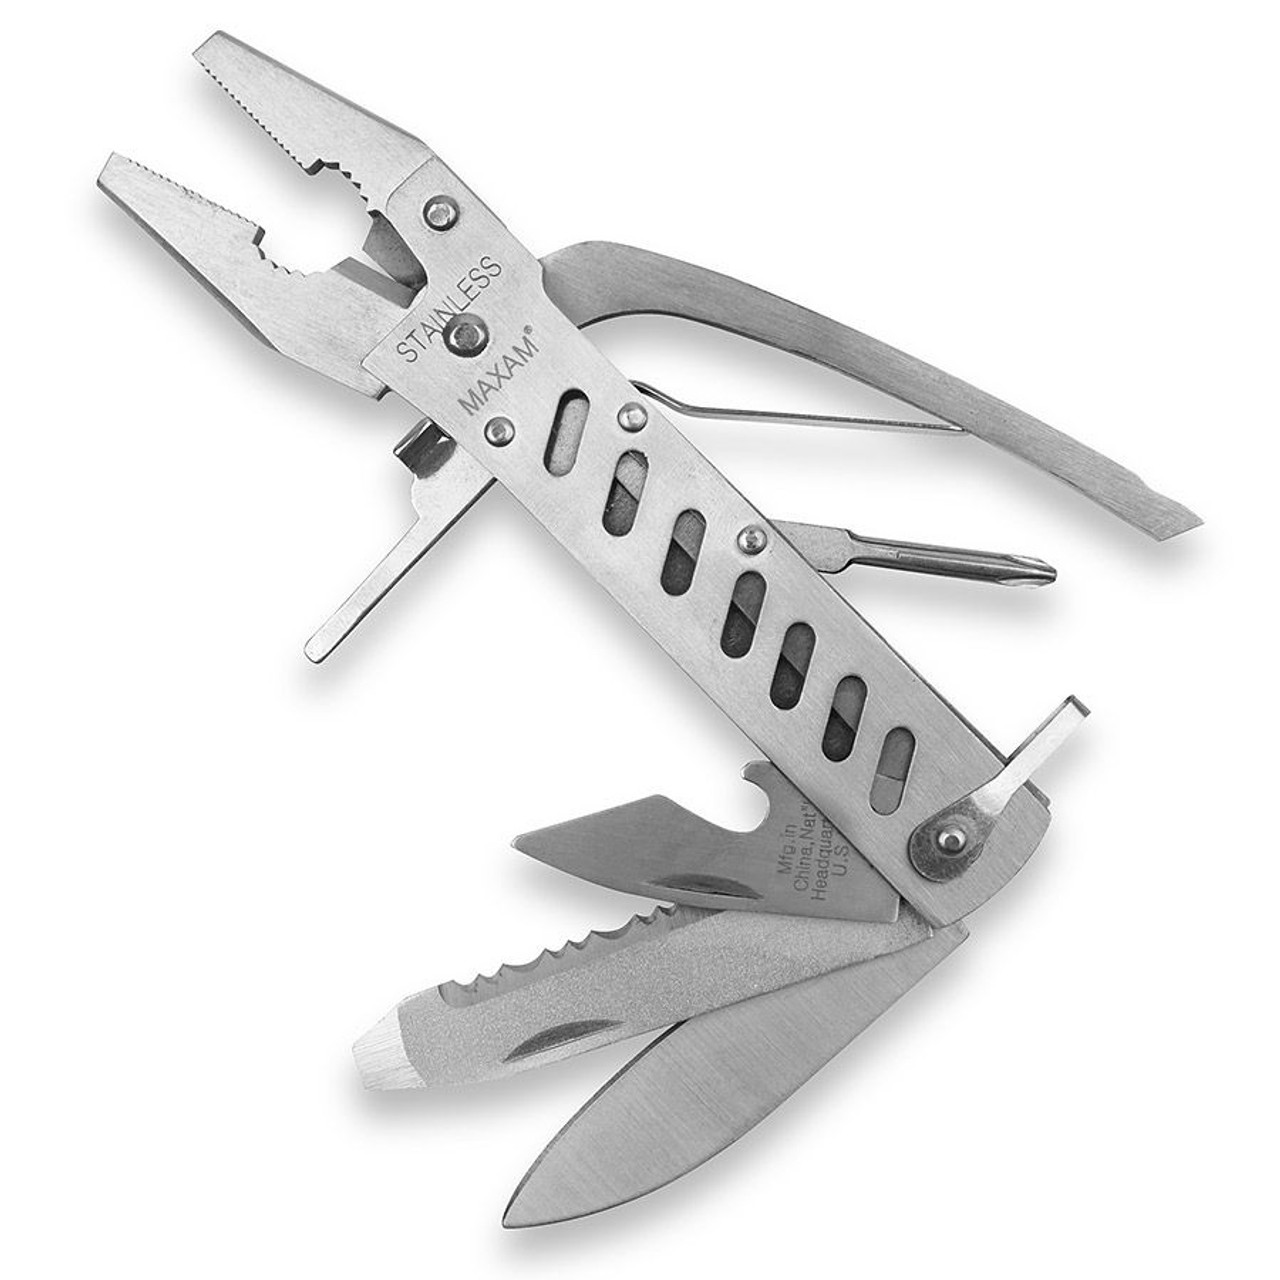 14-Function Multi-Tool with Pliers and Sheath